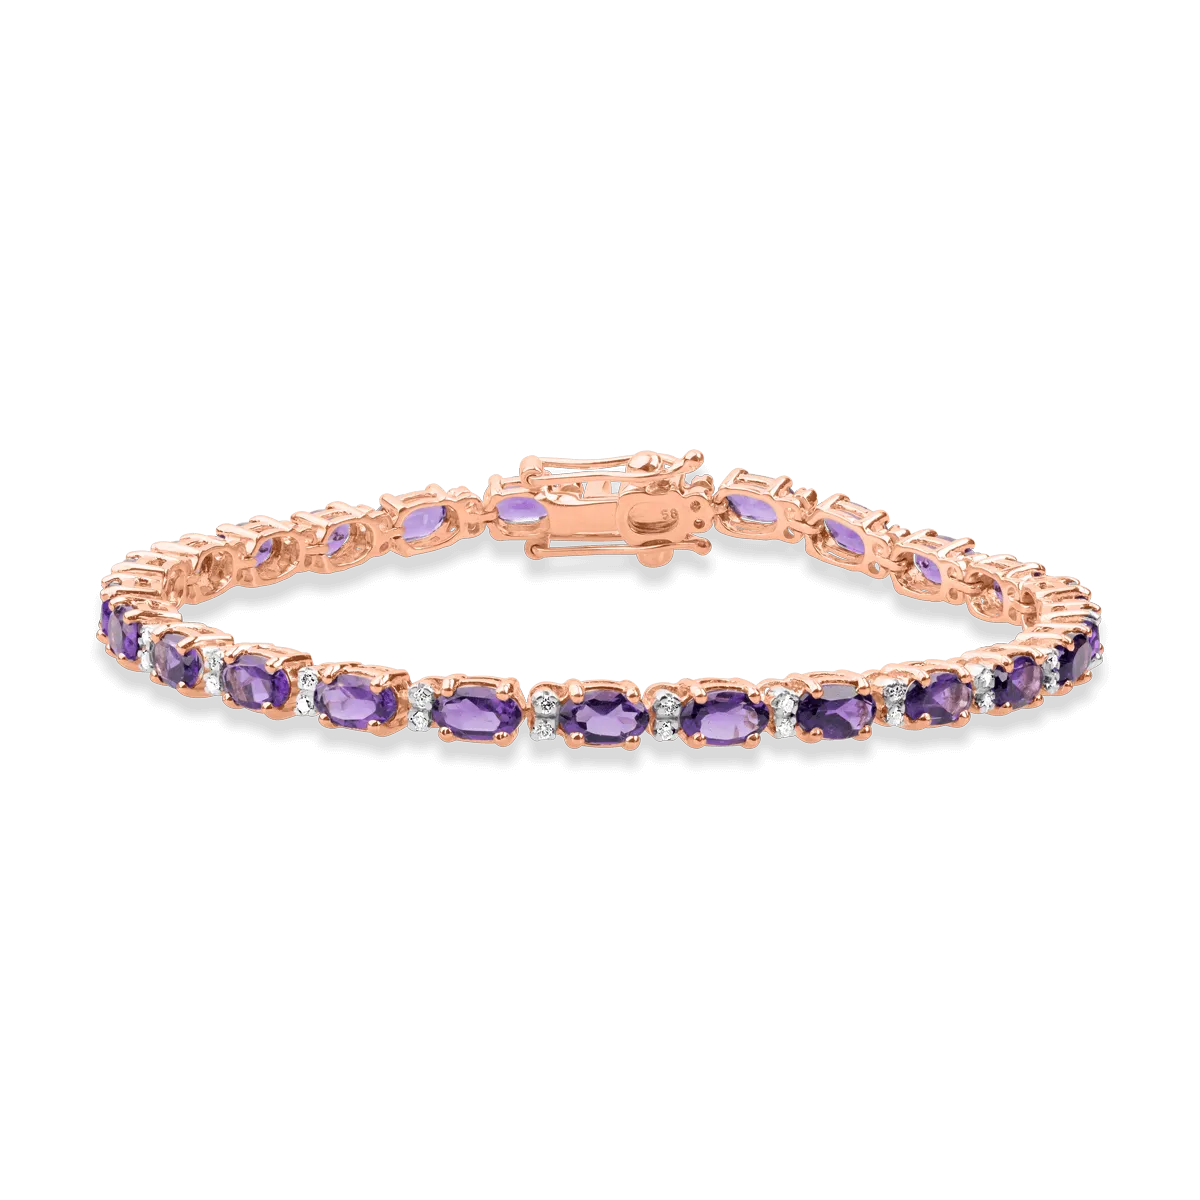 18K rose gold tennis bracelet with 5.03ct amethysts and 0.23ct diamonds